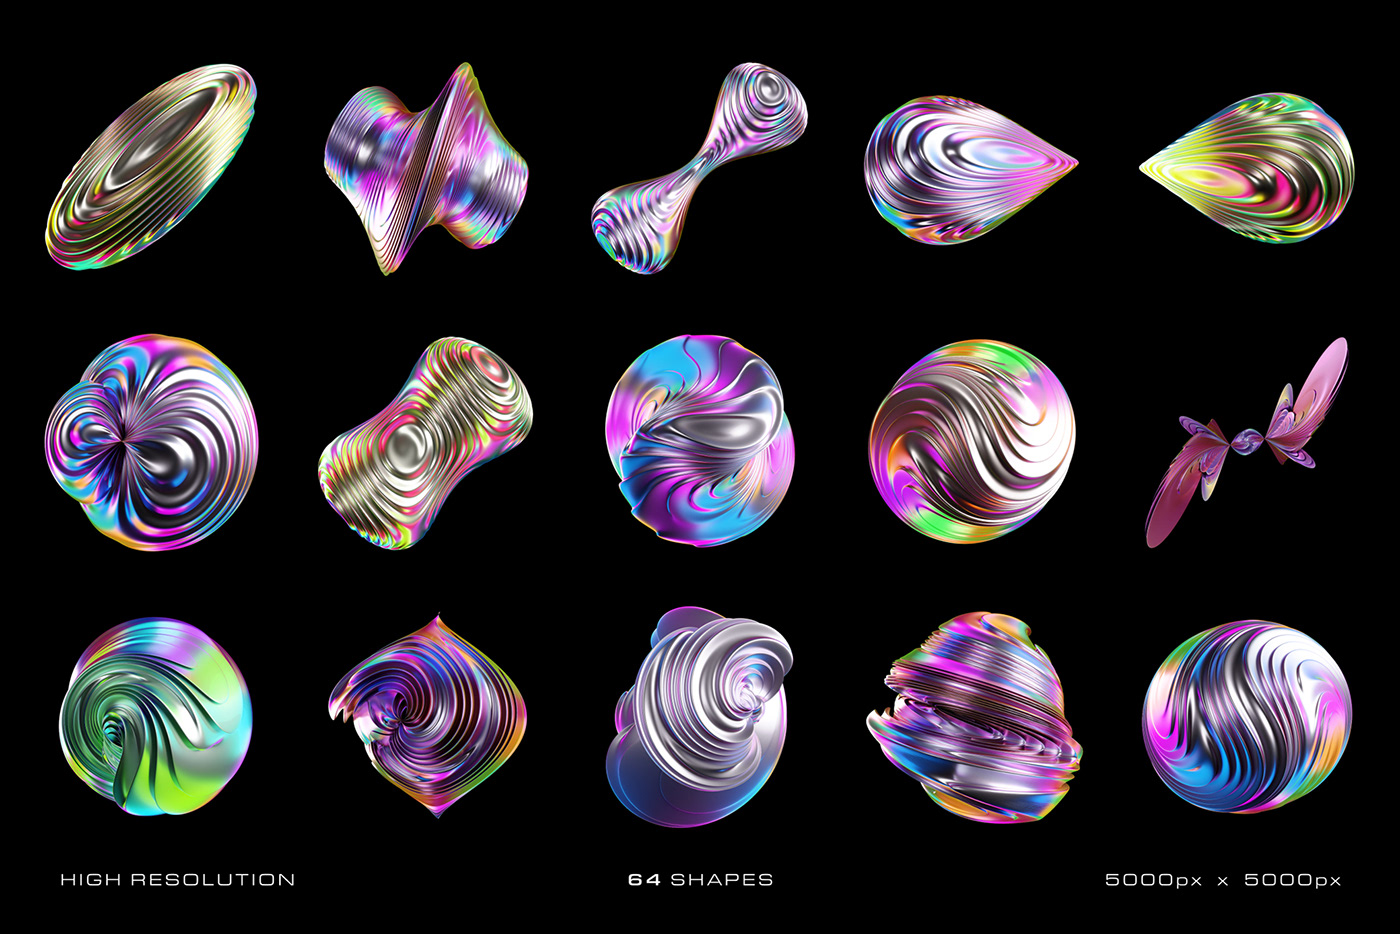 3D assets download free futuristic holo iridescent resources abstract colorful